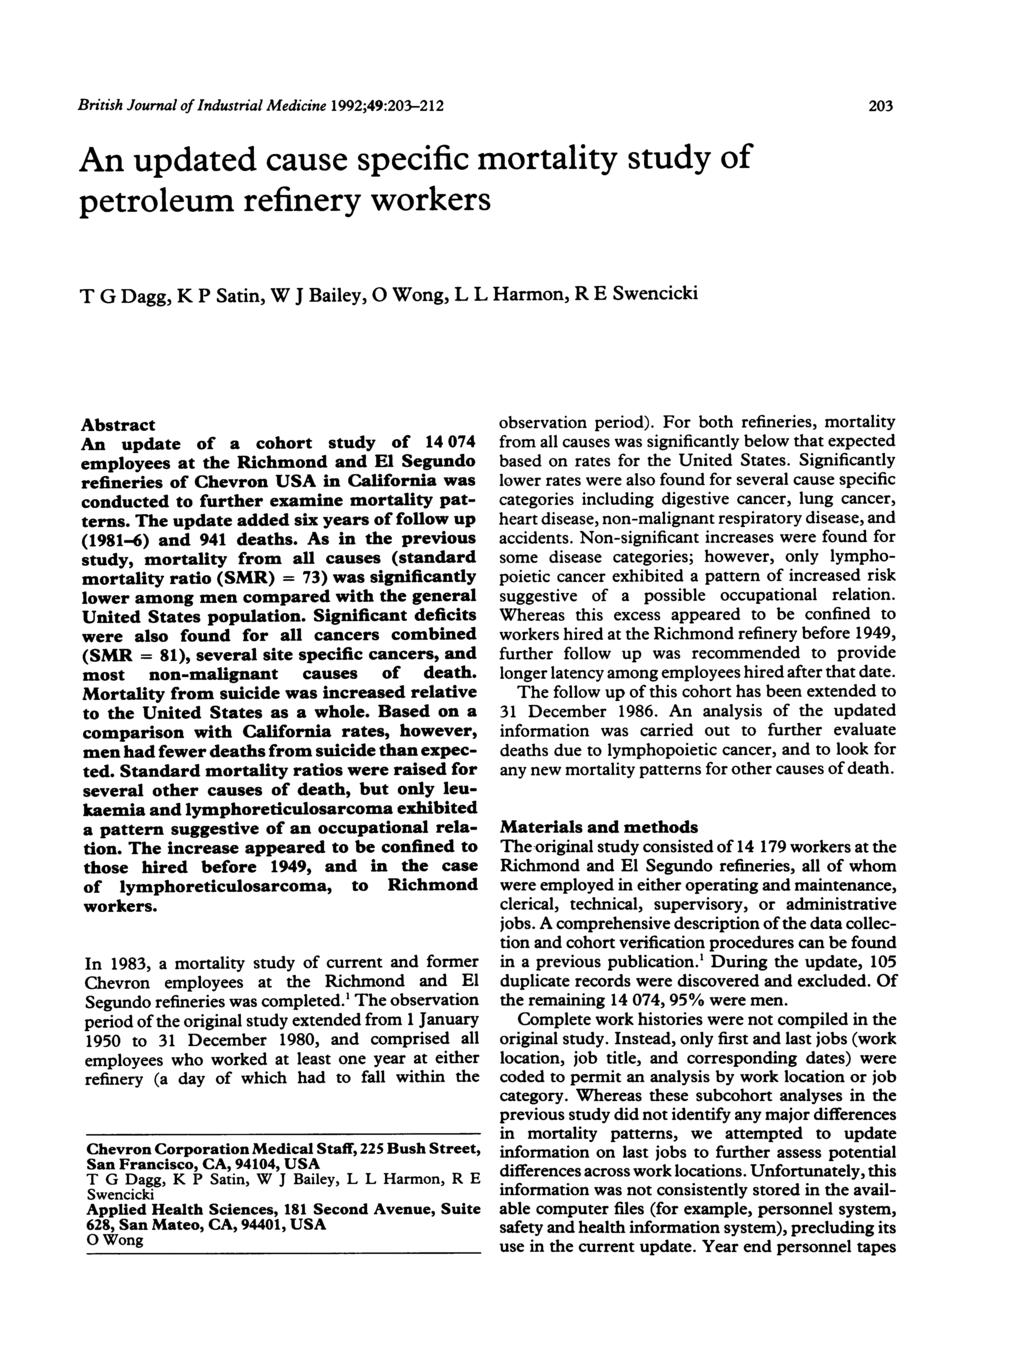 British Journal of Industrial Medicine 1992;49:203-212 An updated cause specific mortality study of petroleum refinery workers T G Dagg, K P Satin, W J Bailey, 0 Wong, L L Harmon, R E Swencicki